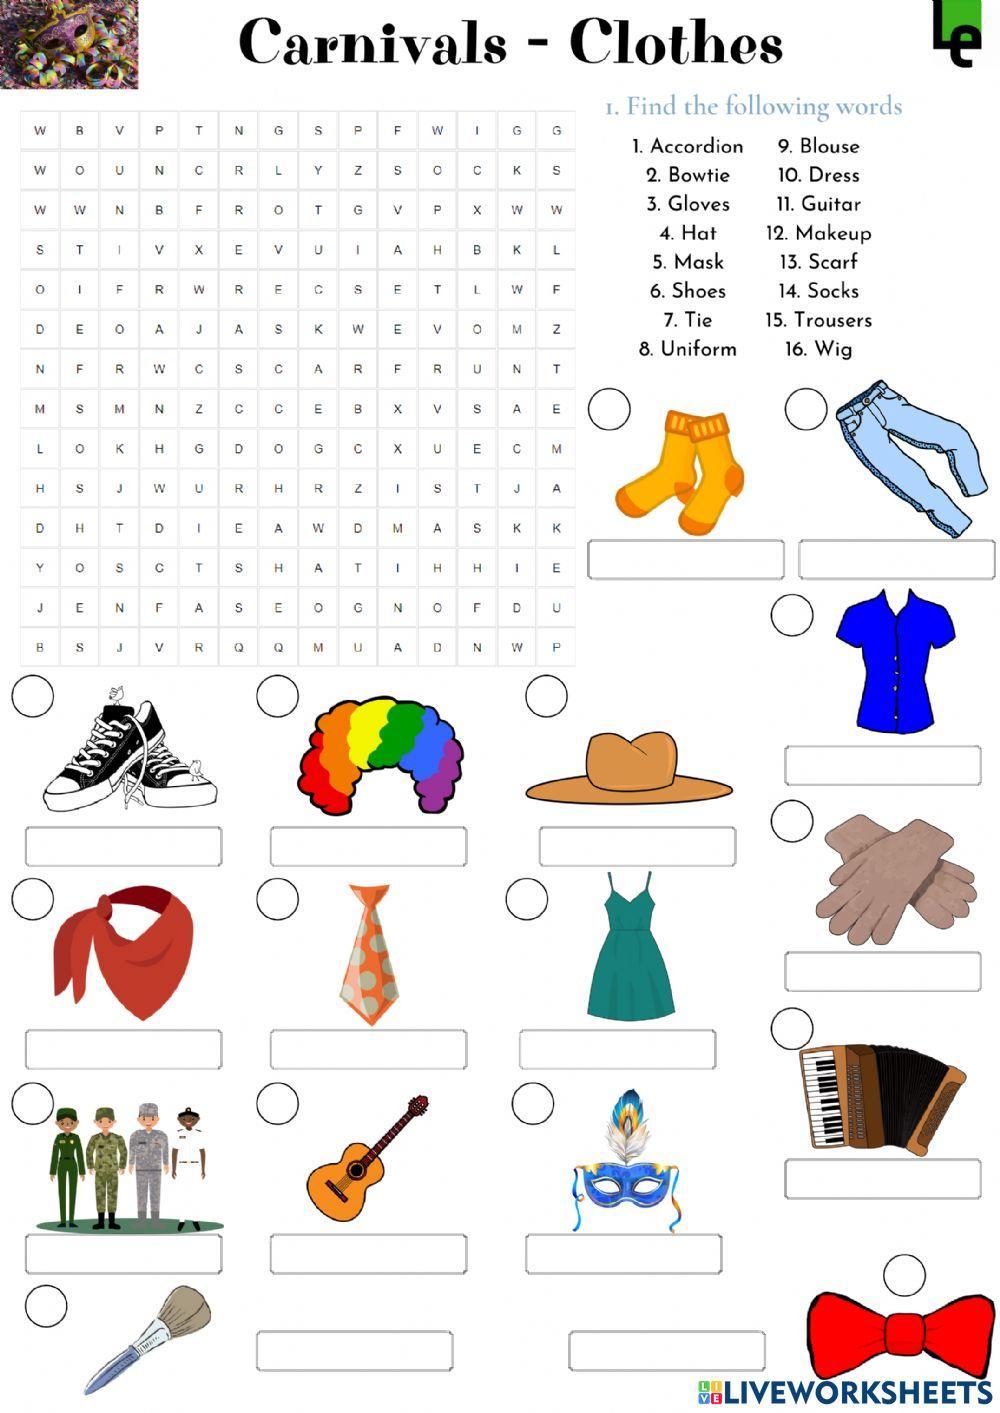 Wordsearch on carnival clothes